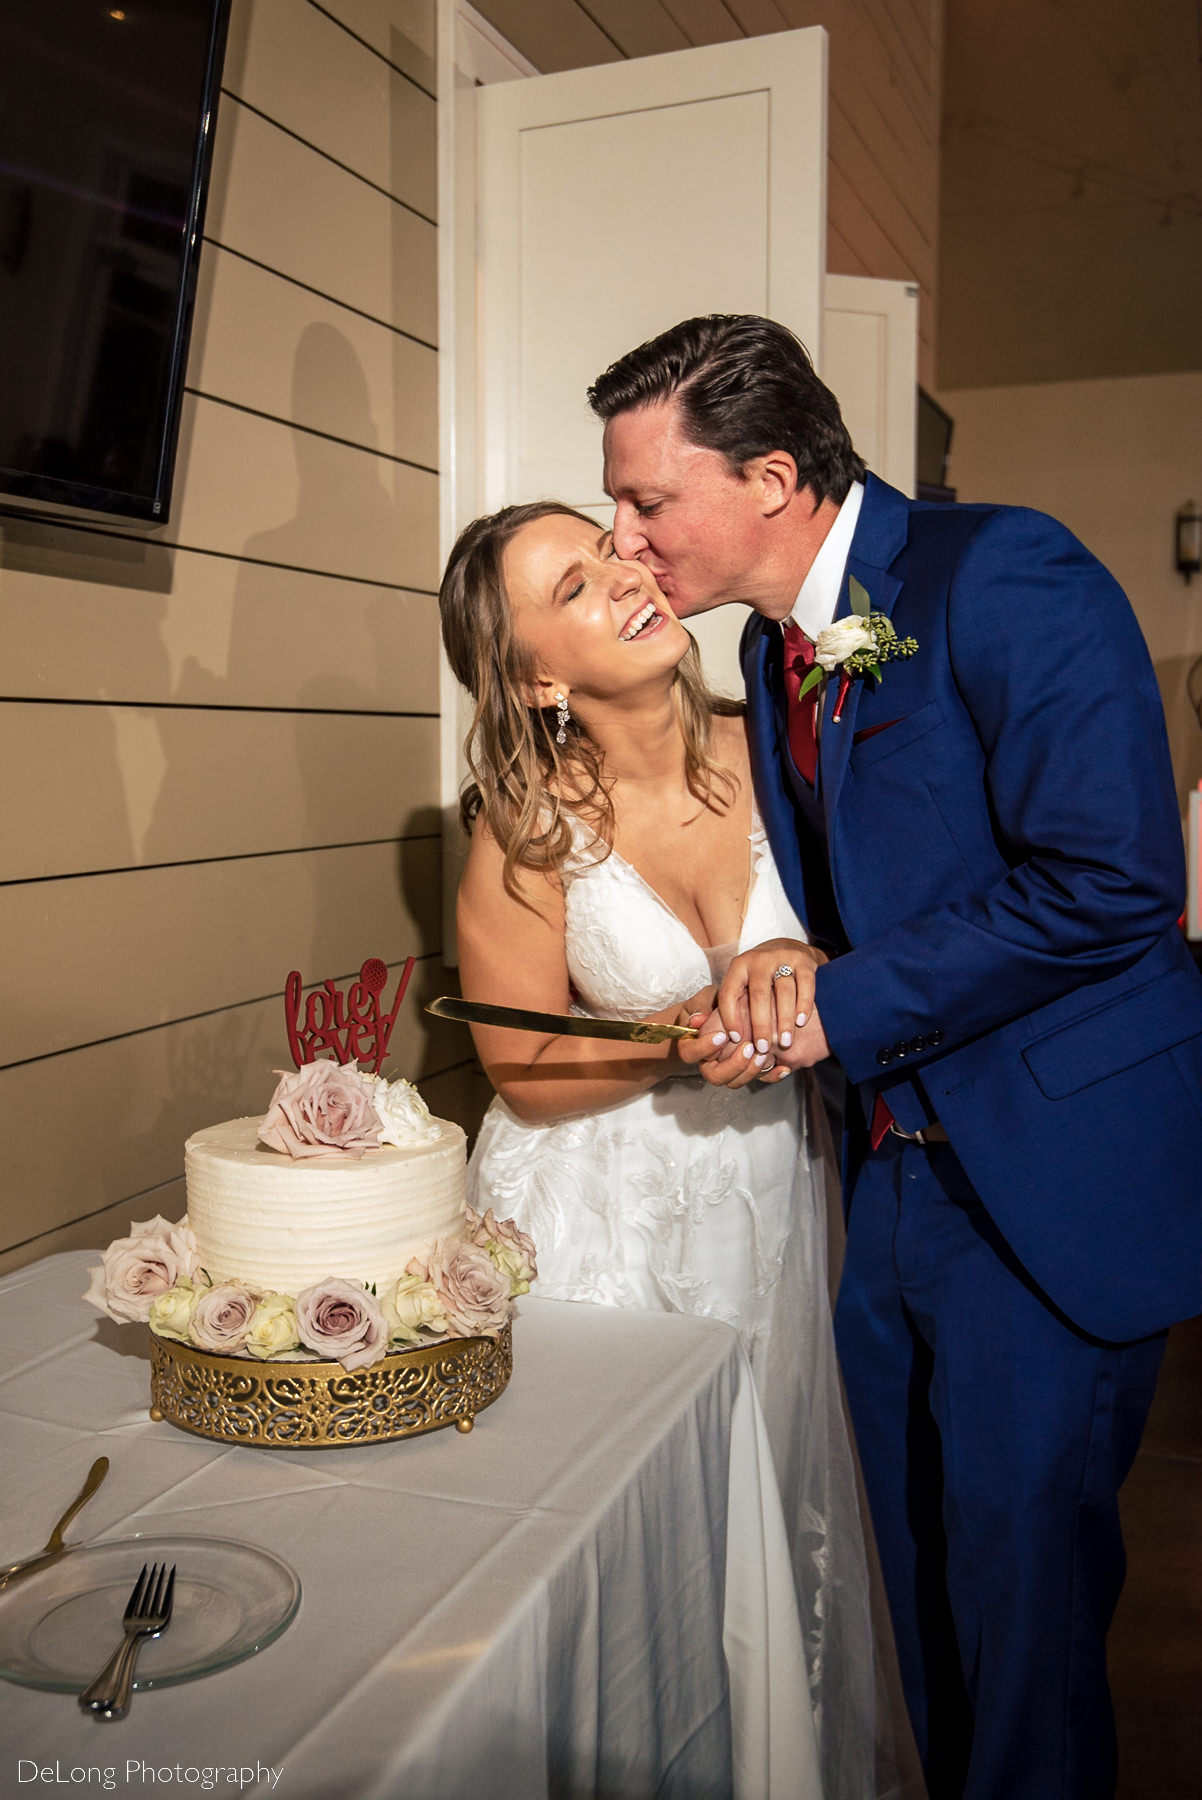 Groom kissing bride on the cheek who is laughing while they hold their cake knife before cutting their wedding cake at Pine Island Country Club in Charlotte, NC by Charlotte wedding Photographers DeLong Photography